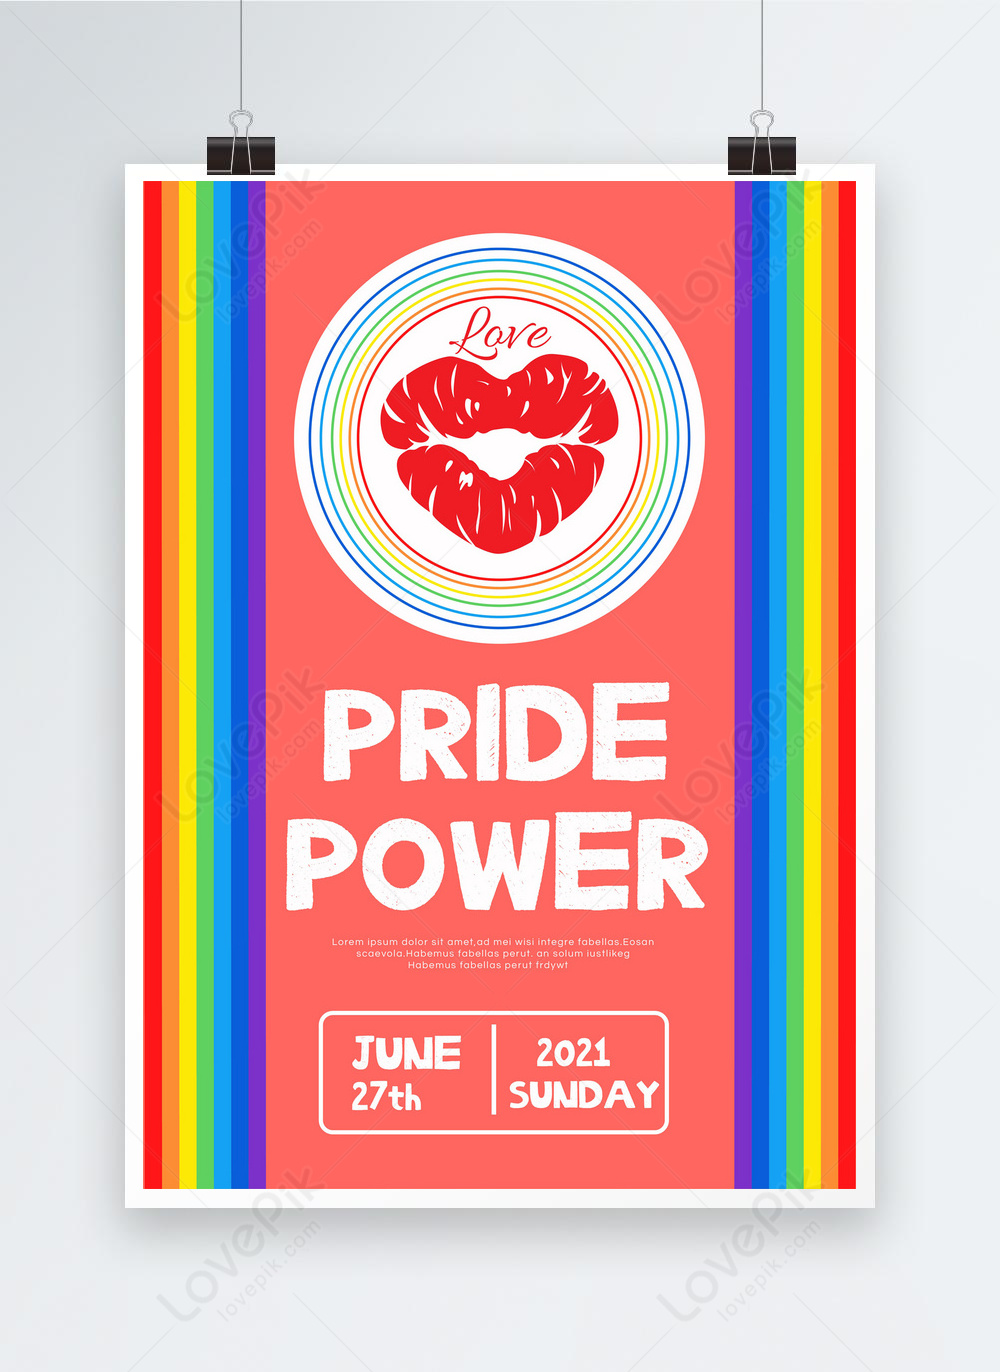 Pink gay pride power flyer template image_picture free download ...